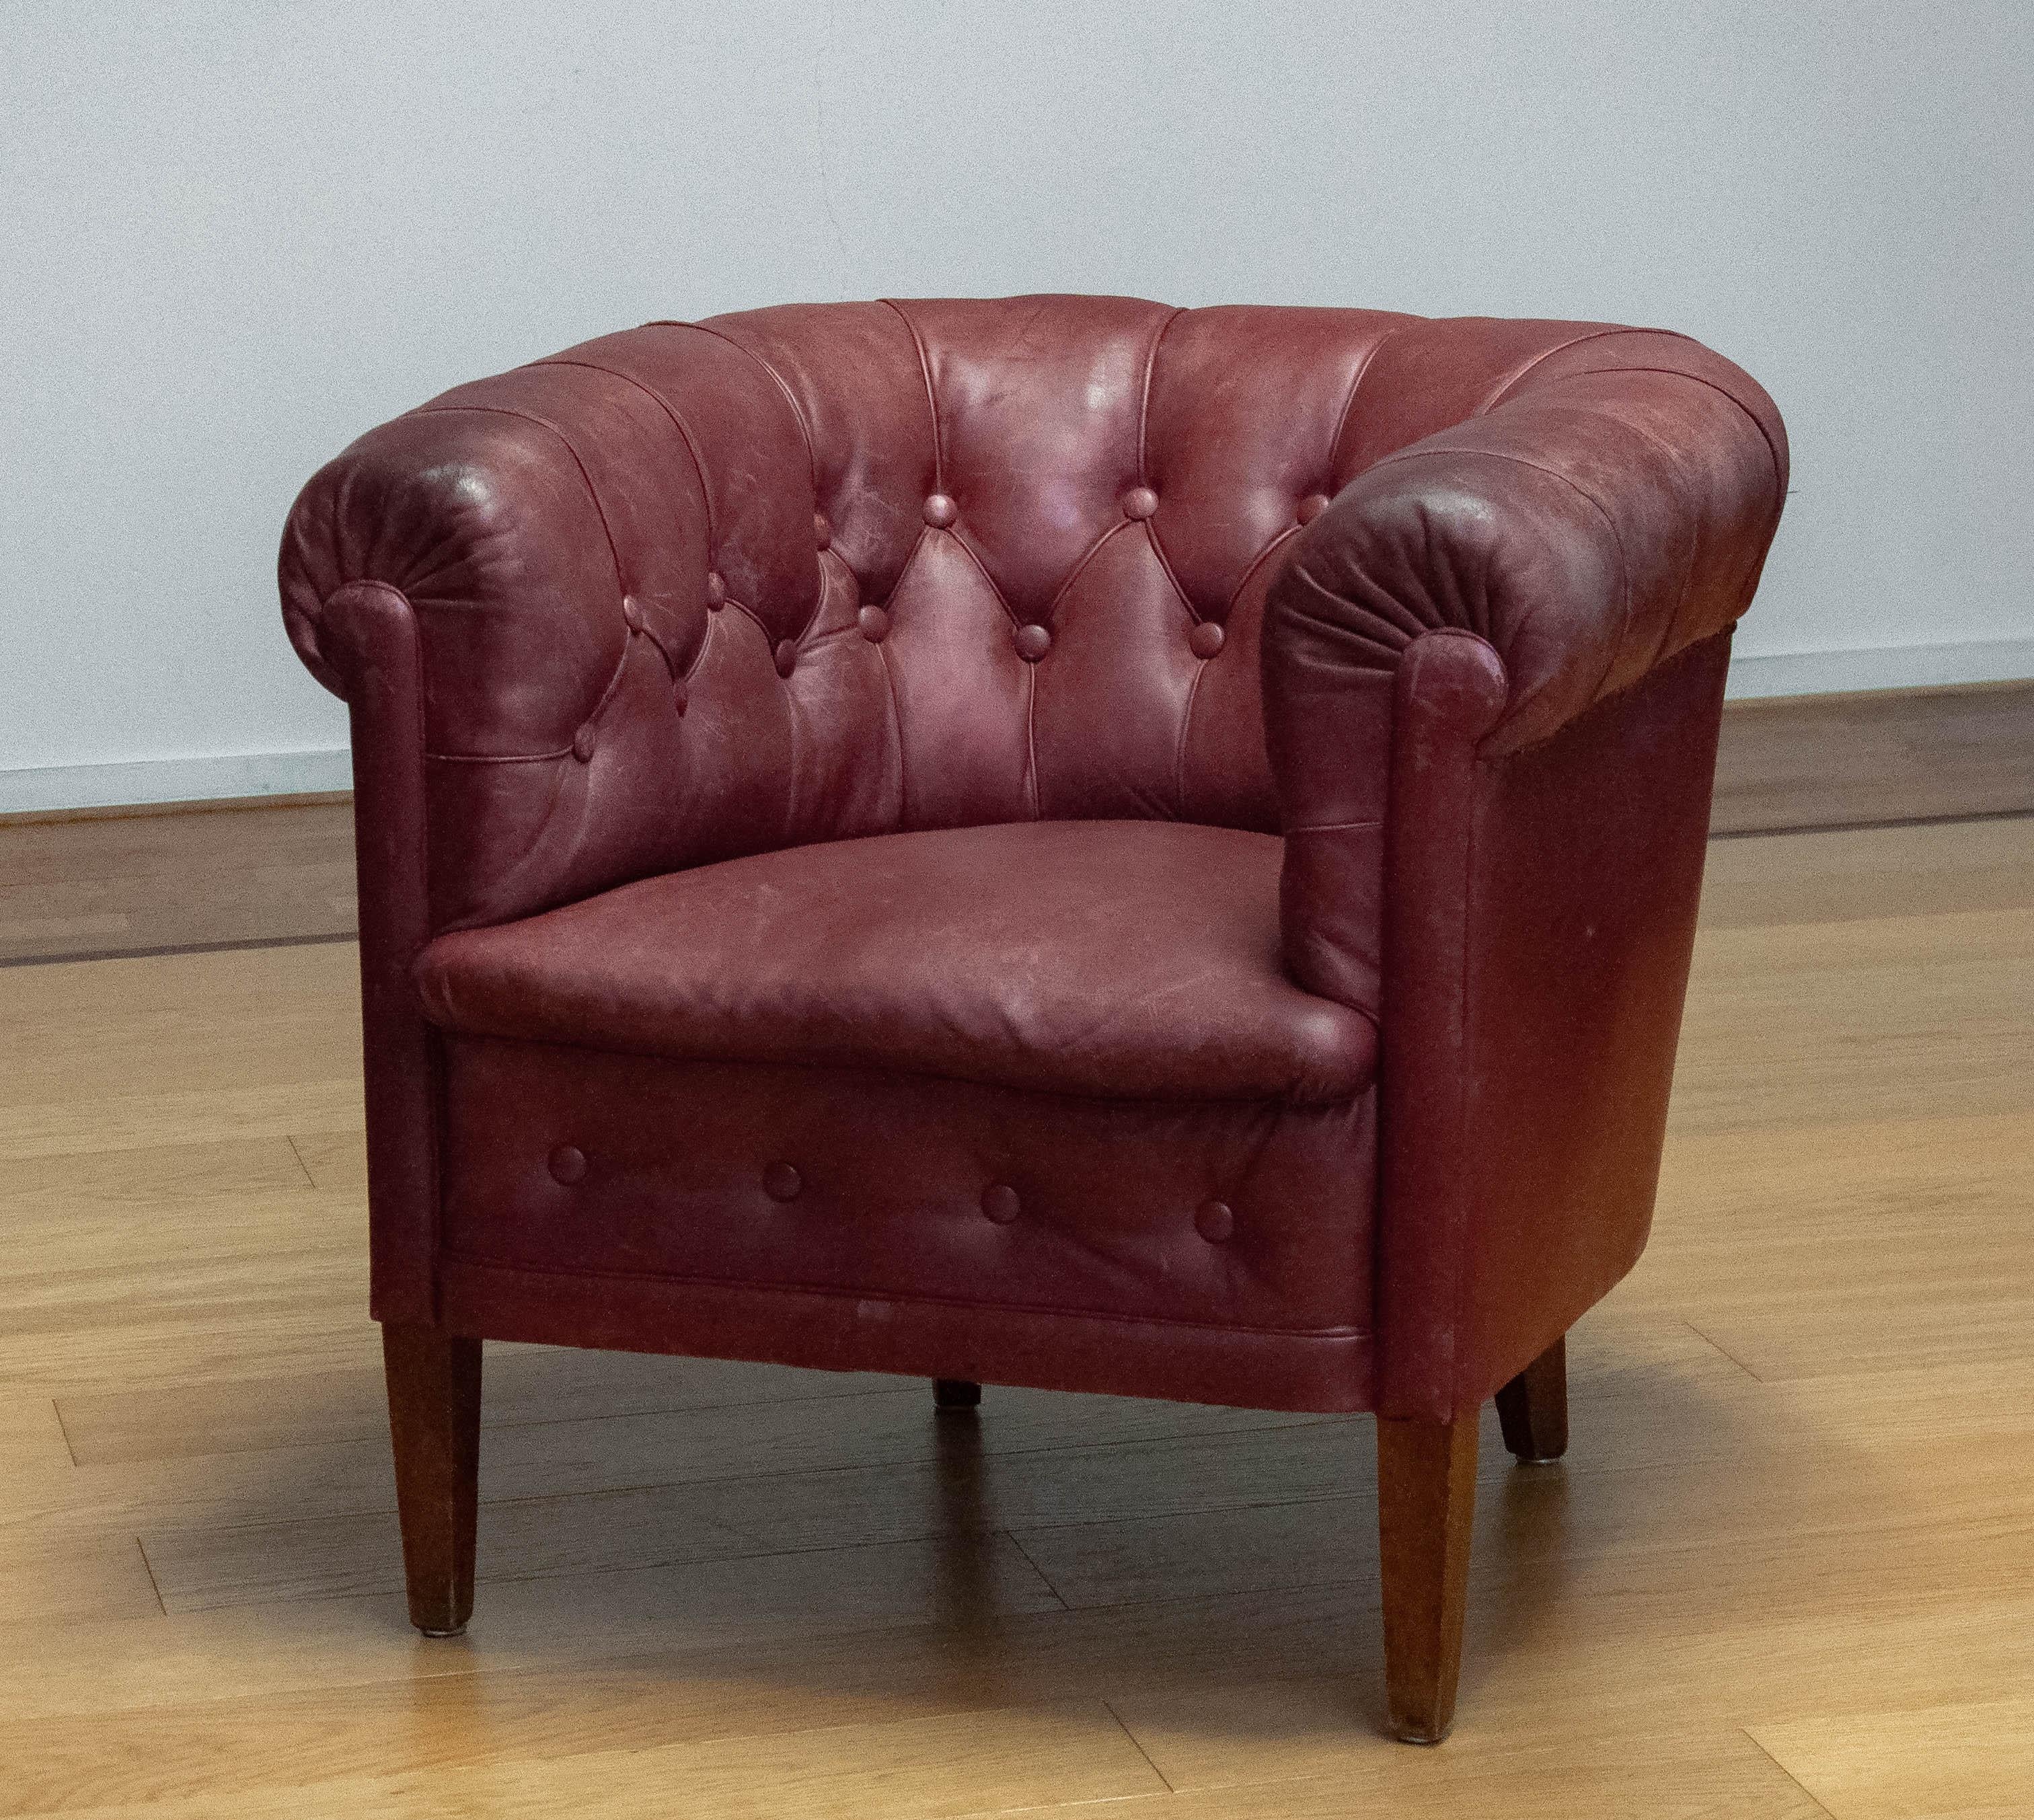 1930s Swedish Crimson Red Chesterfield Club Chair in Patinated Leather In Good Condition For Sale In Silvolde, Gelderland